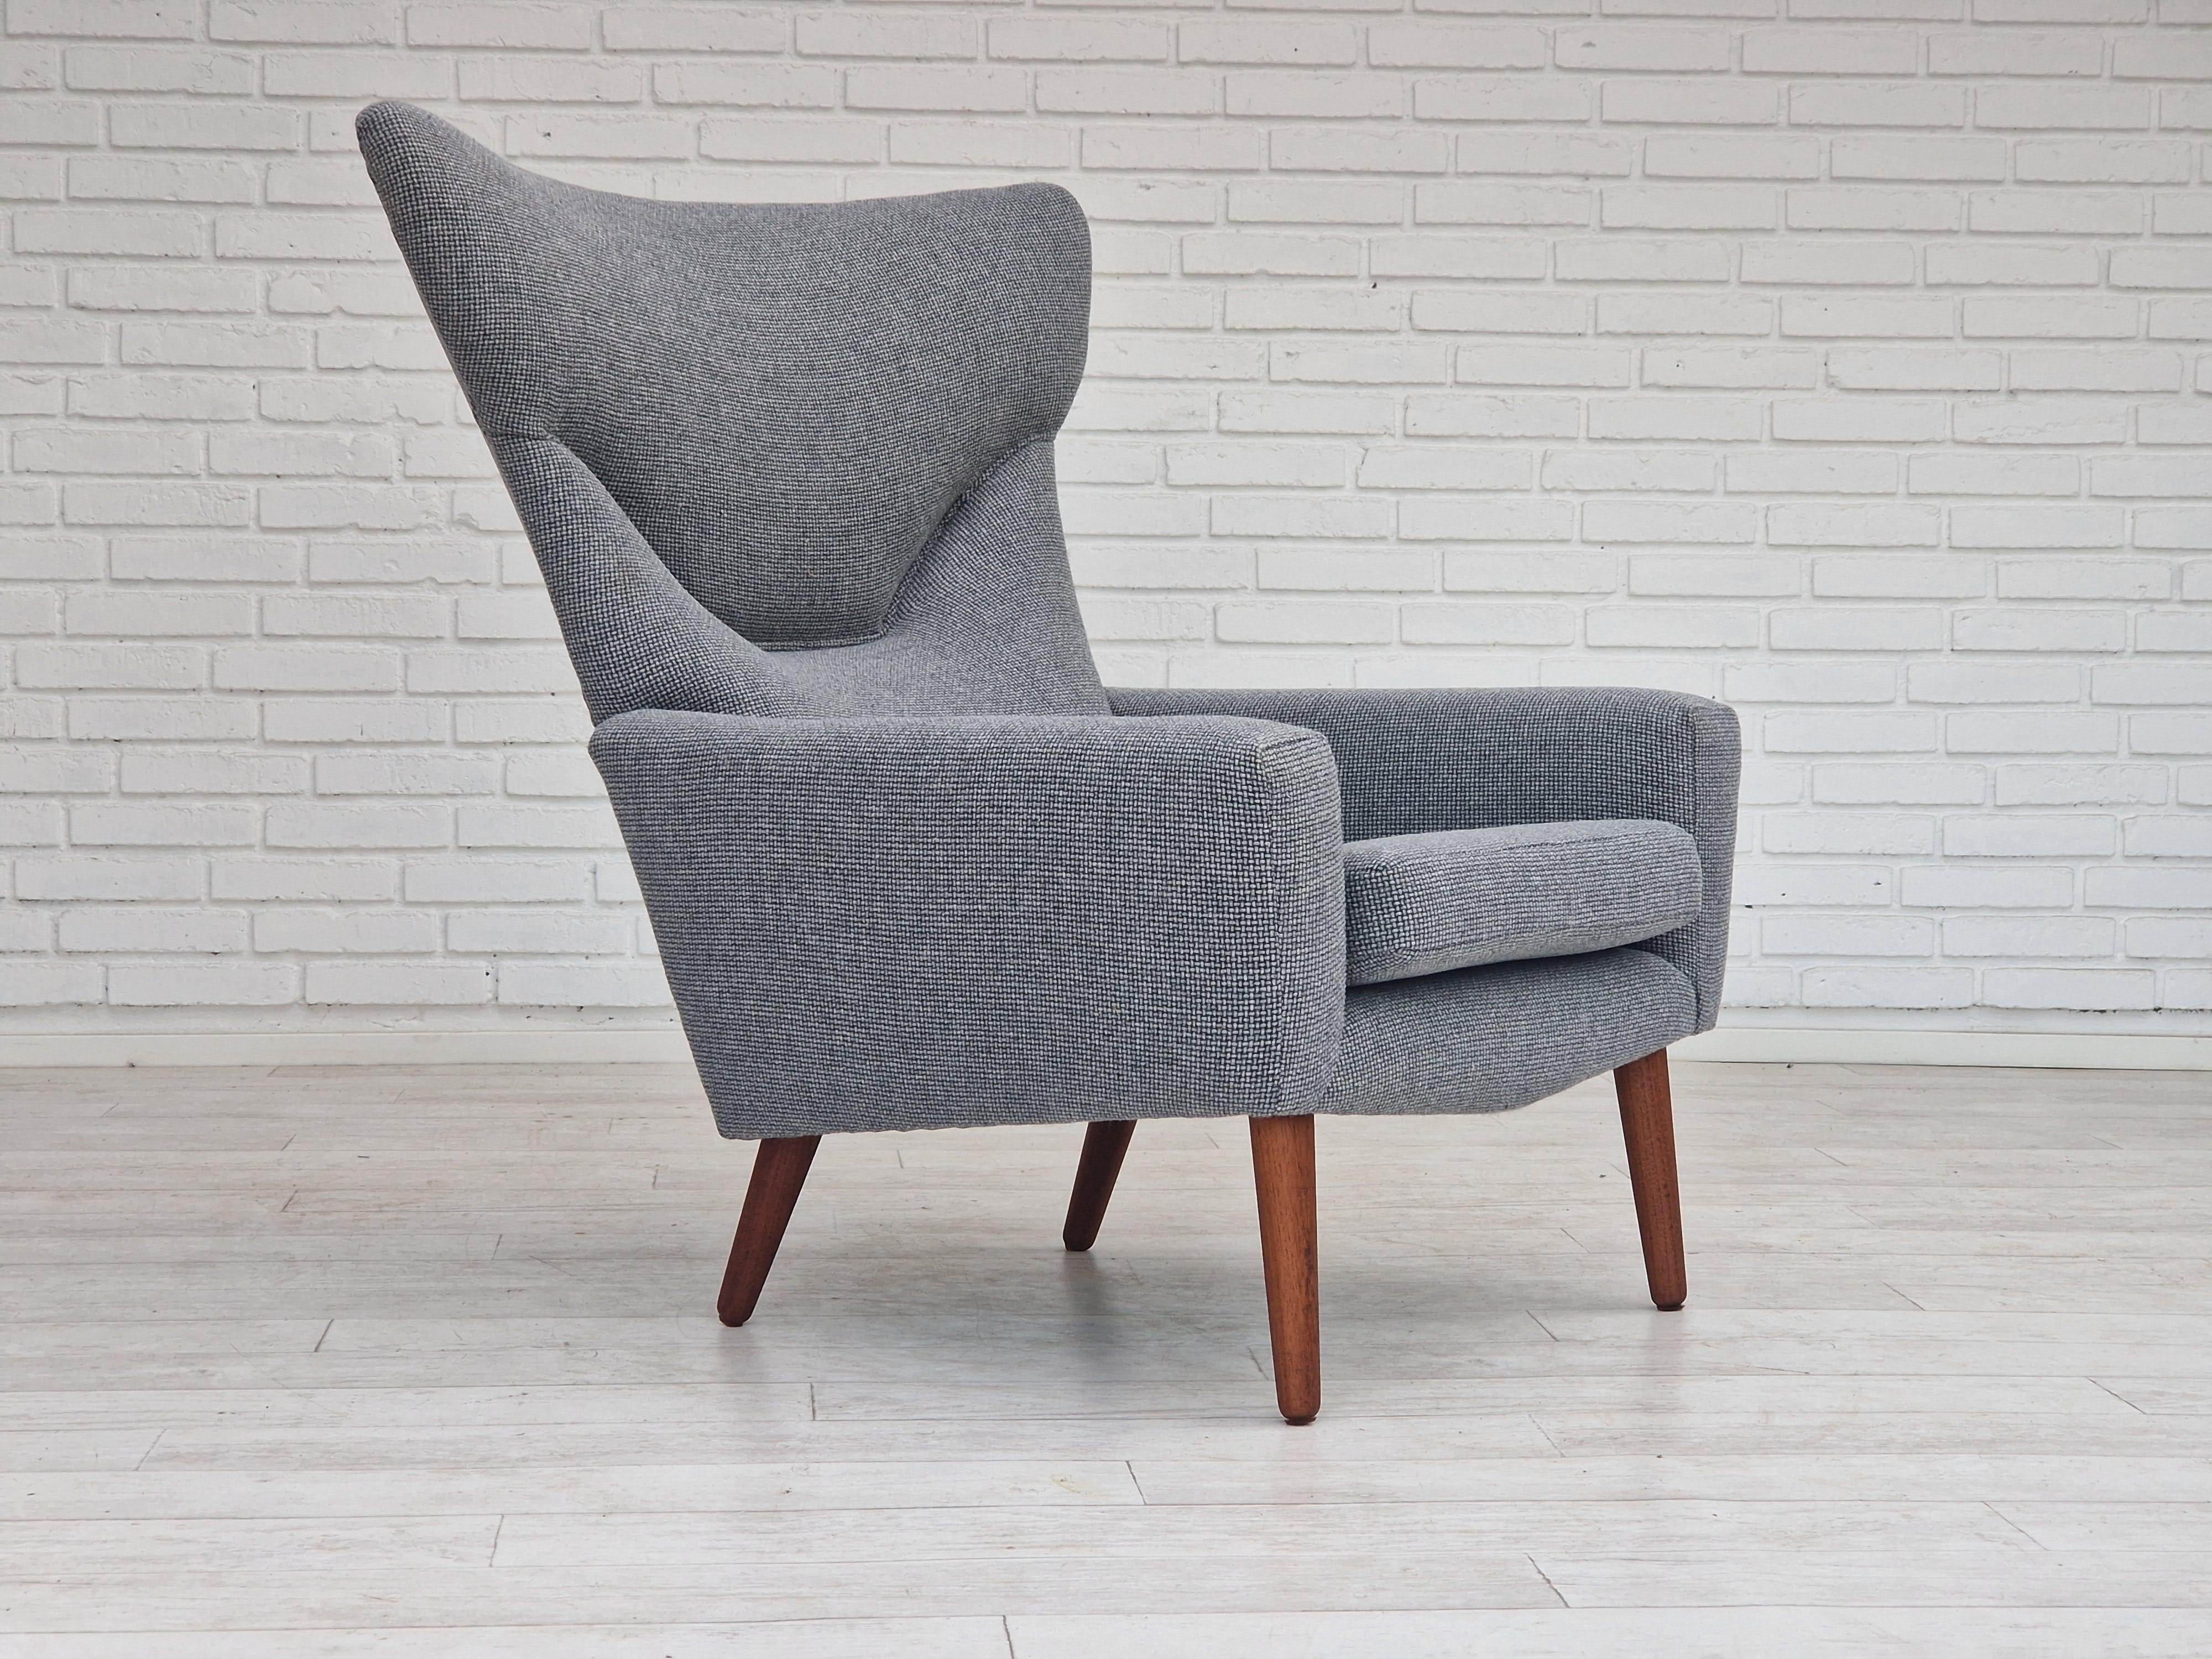 1960s Danish design by Kurt Østervig, relax chair model 62H. Completely renovated-reupholstered in quality furniture wool fabric. Removable teak arm guard. Brand new upholstery with natural coconut mat and brand new seat cushion. Teak legs.